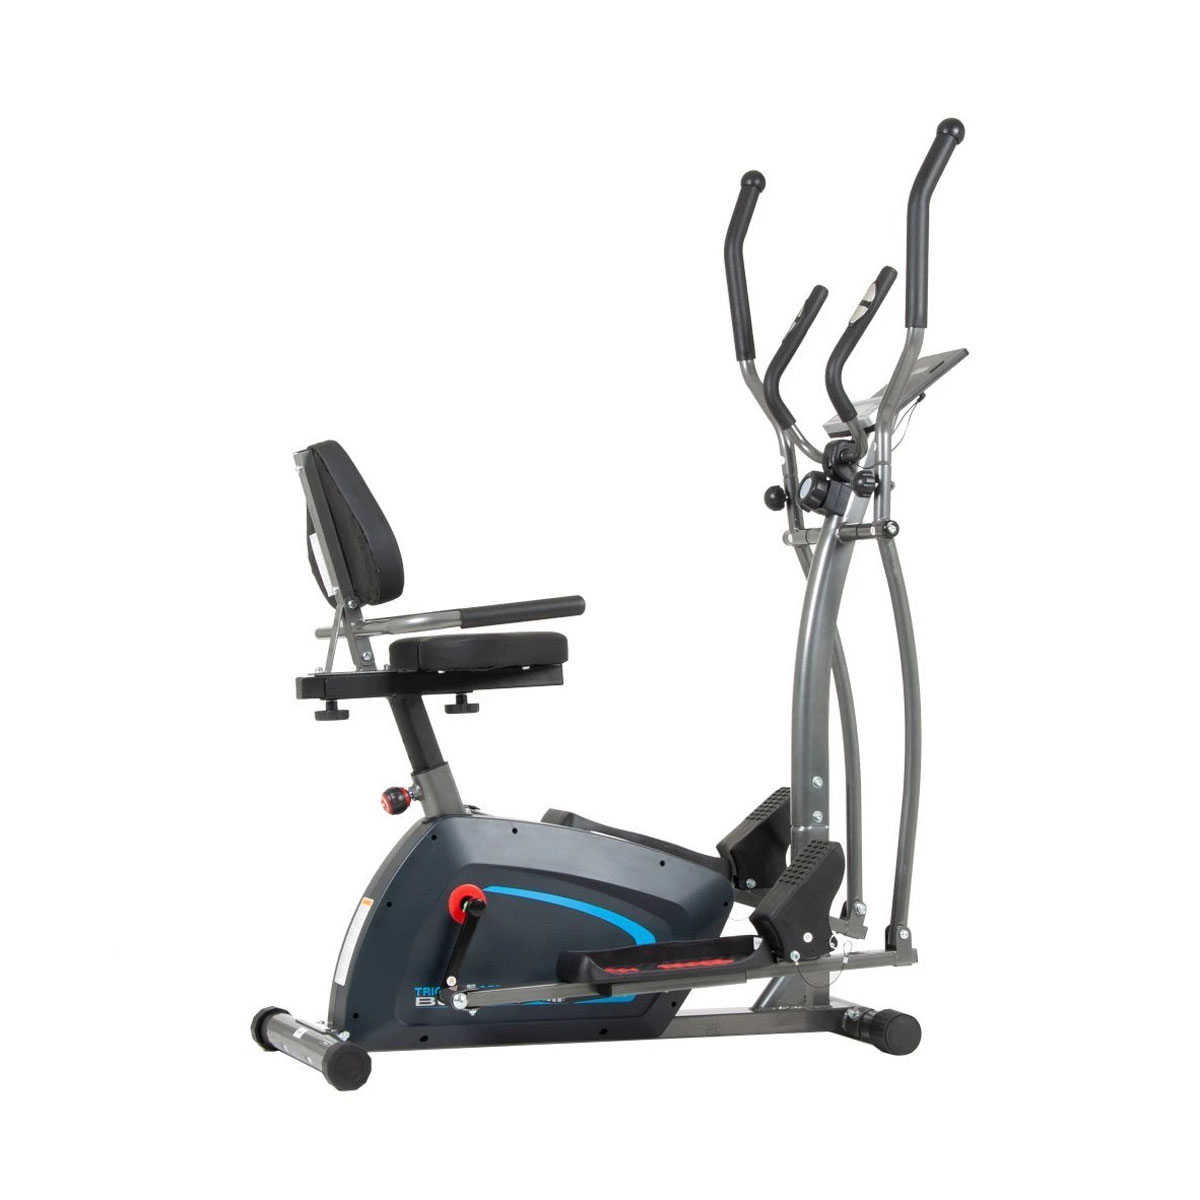 Body Champ BRT1875 3-in-1 Elliptical Trainer, Magnetic Resistance, Heart Rate, Max. 250 lbs - image 1 of 7